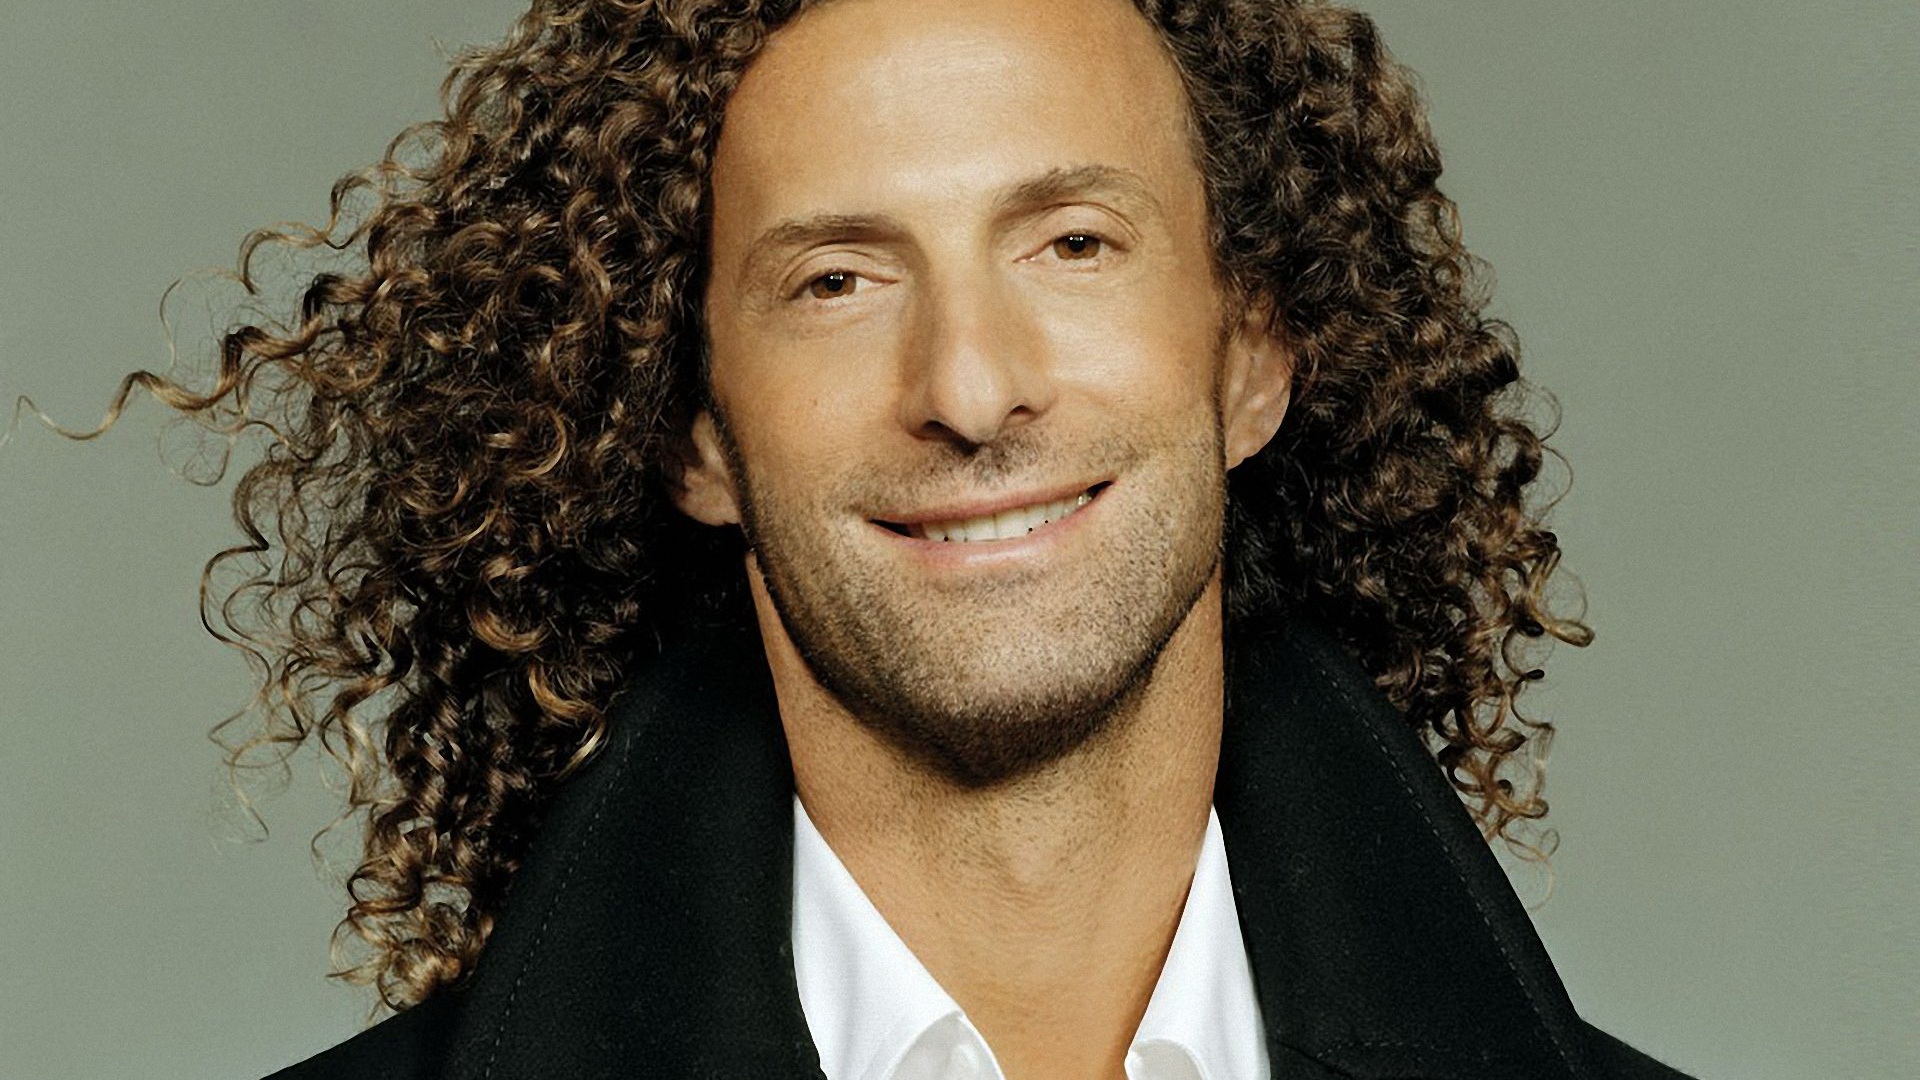 Have Yourself A Merry Little Christmas av Kenny G